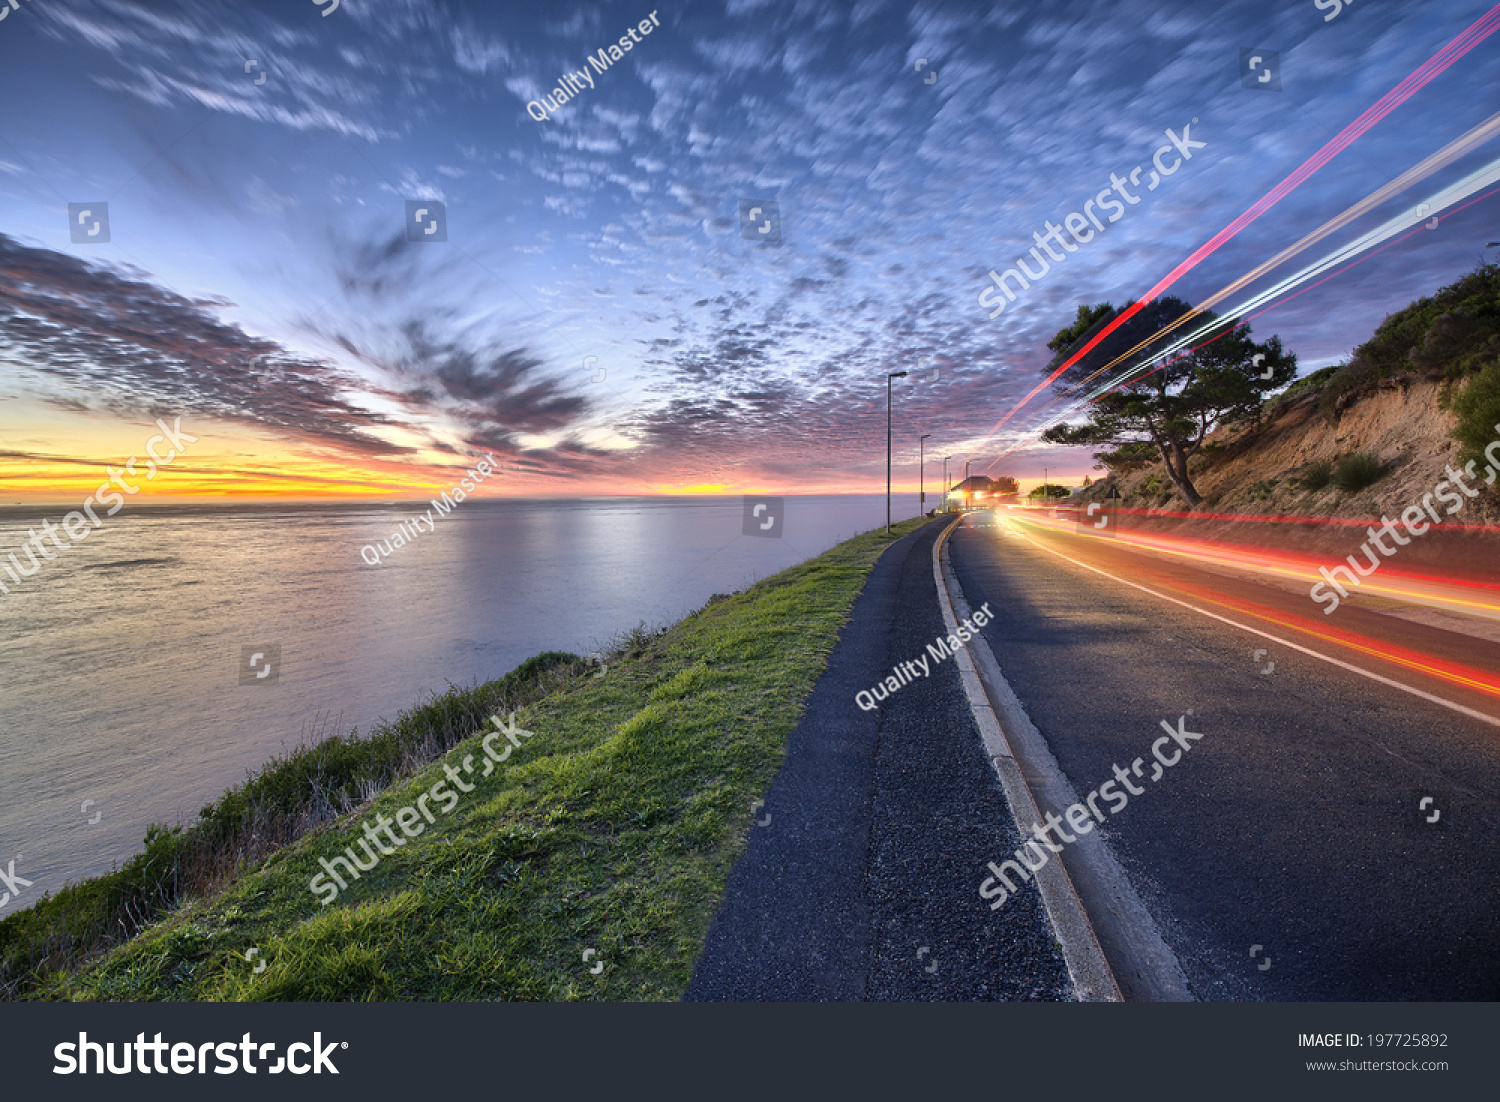 Cape Town sunset over ocean and road to the right with cars passing by shown with colorful streaks of light #197725892